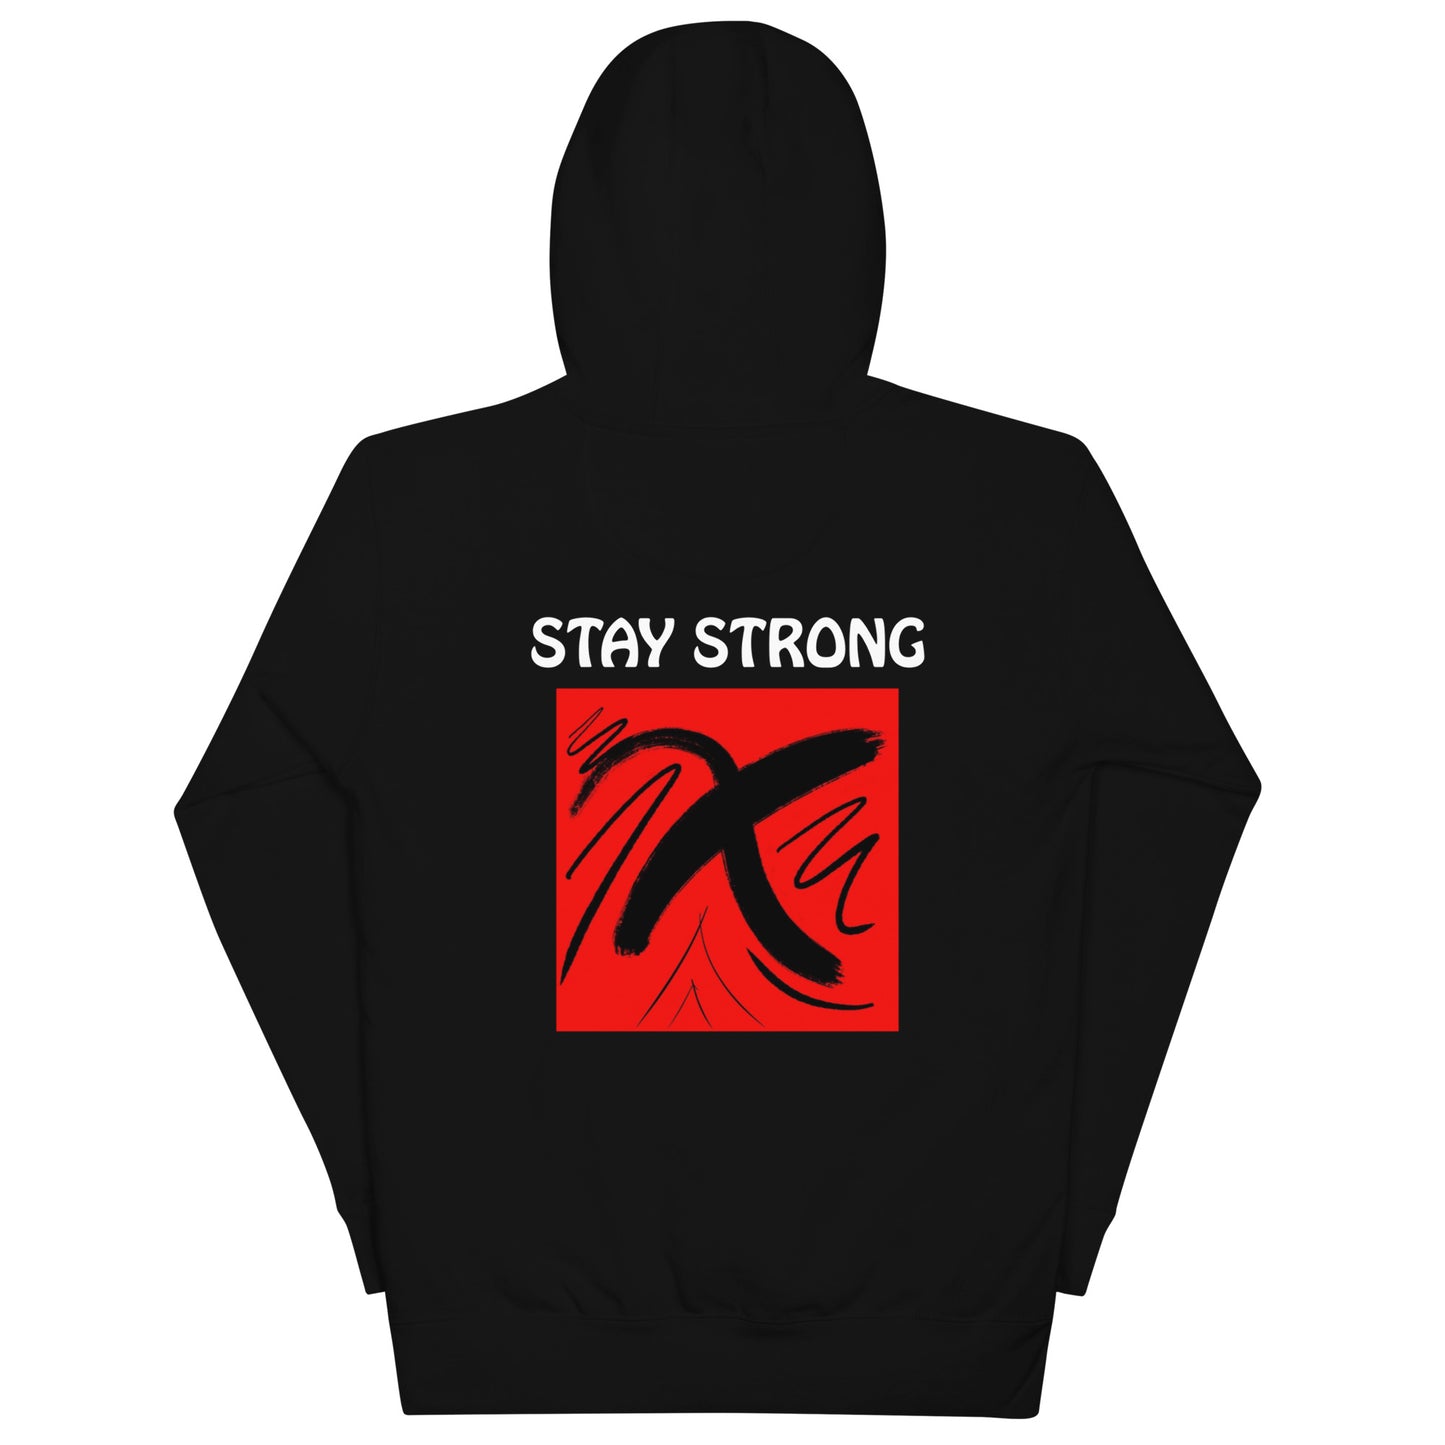 Unisex "Stay Strong" Hoodie